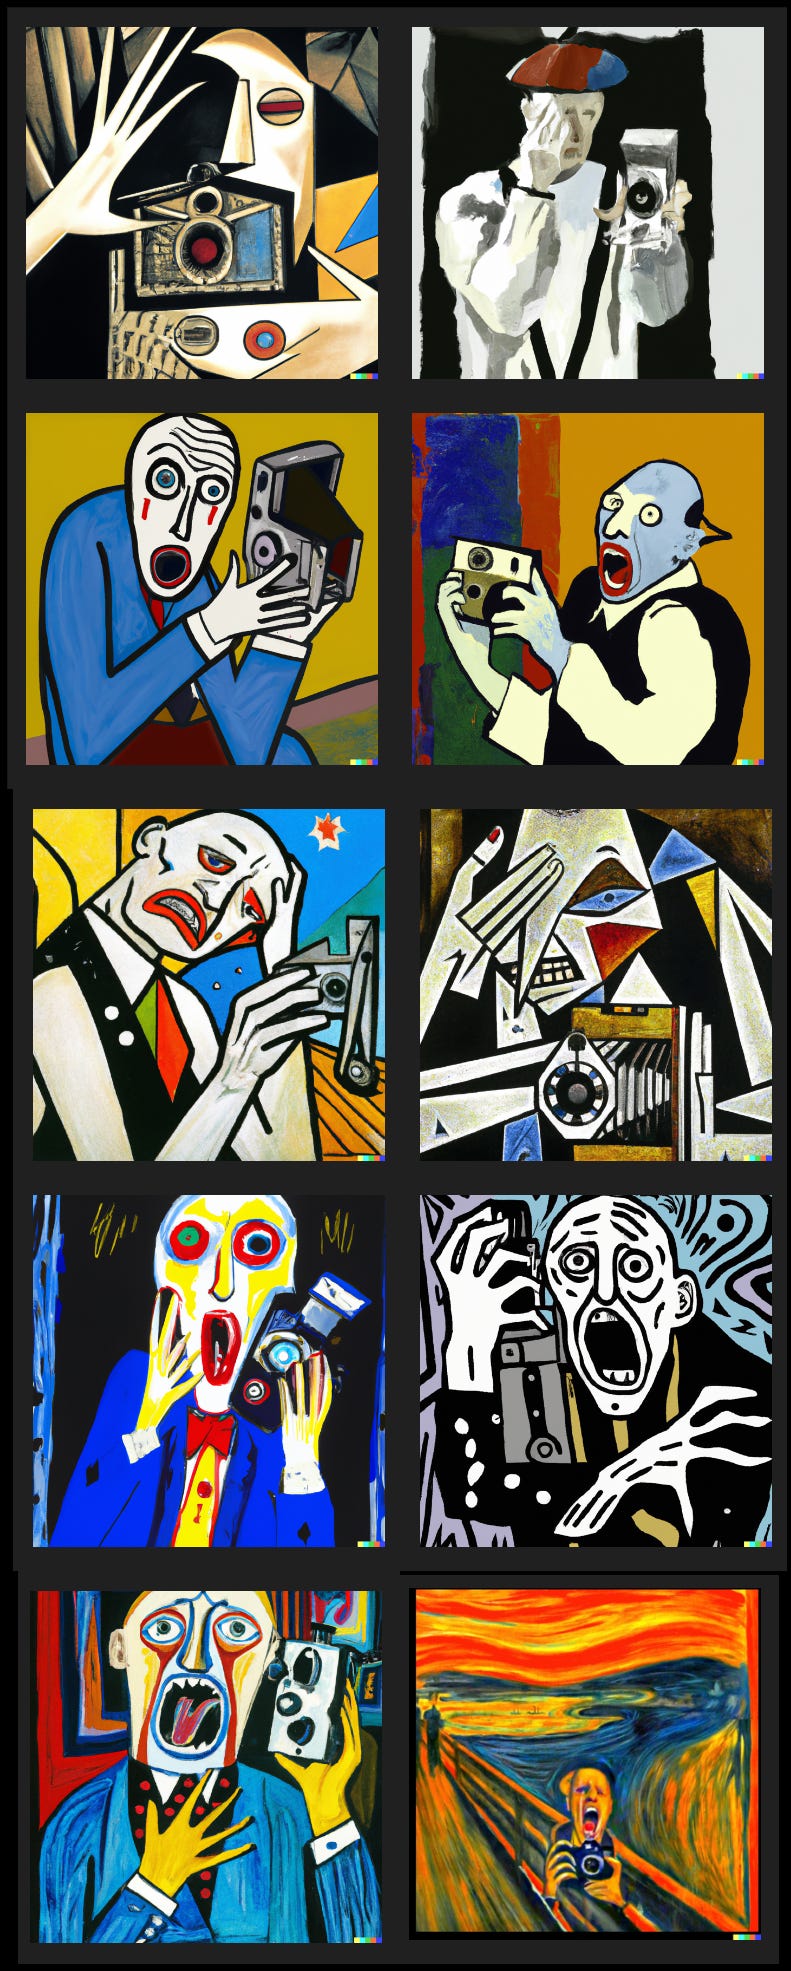 10 different paintings, all in different styles, of a bald man crying while holding a camera.